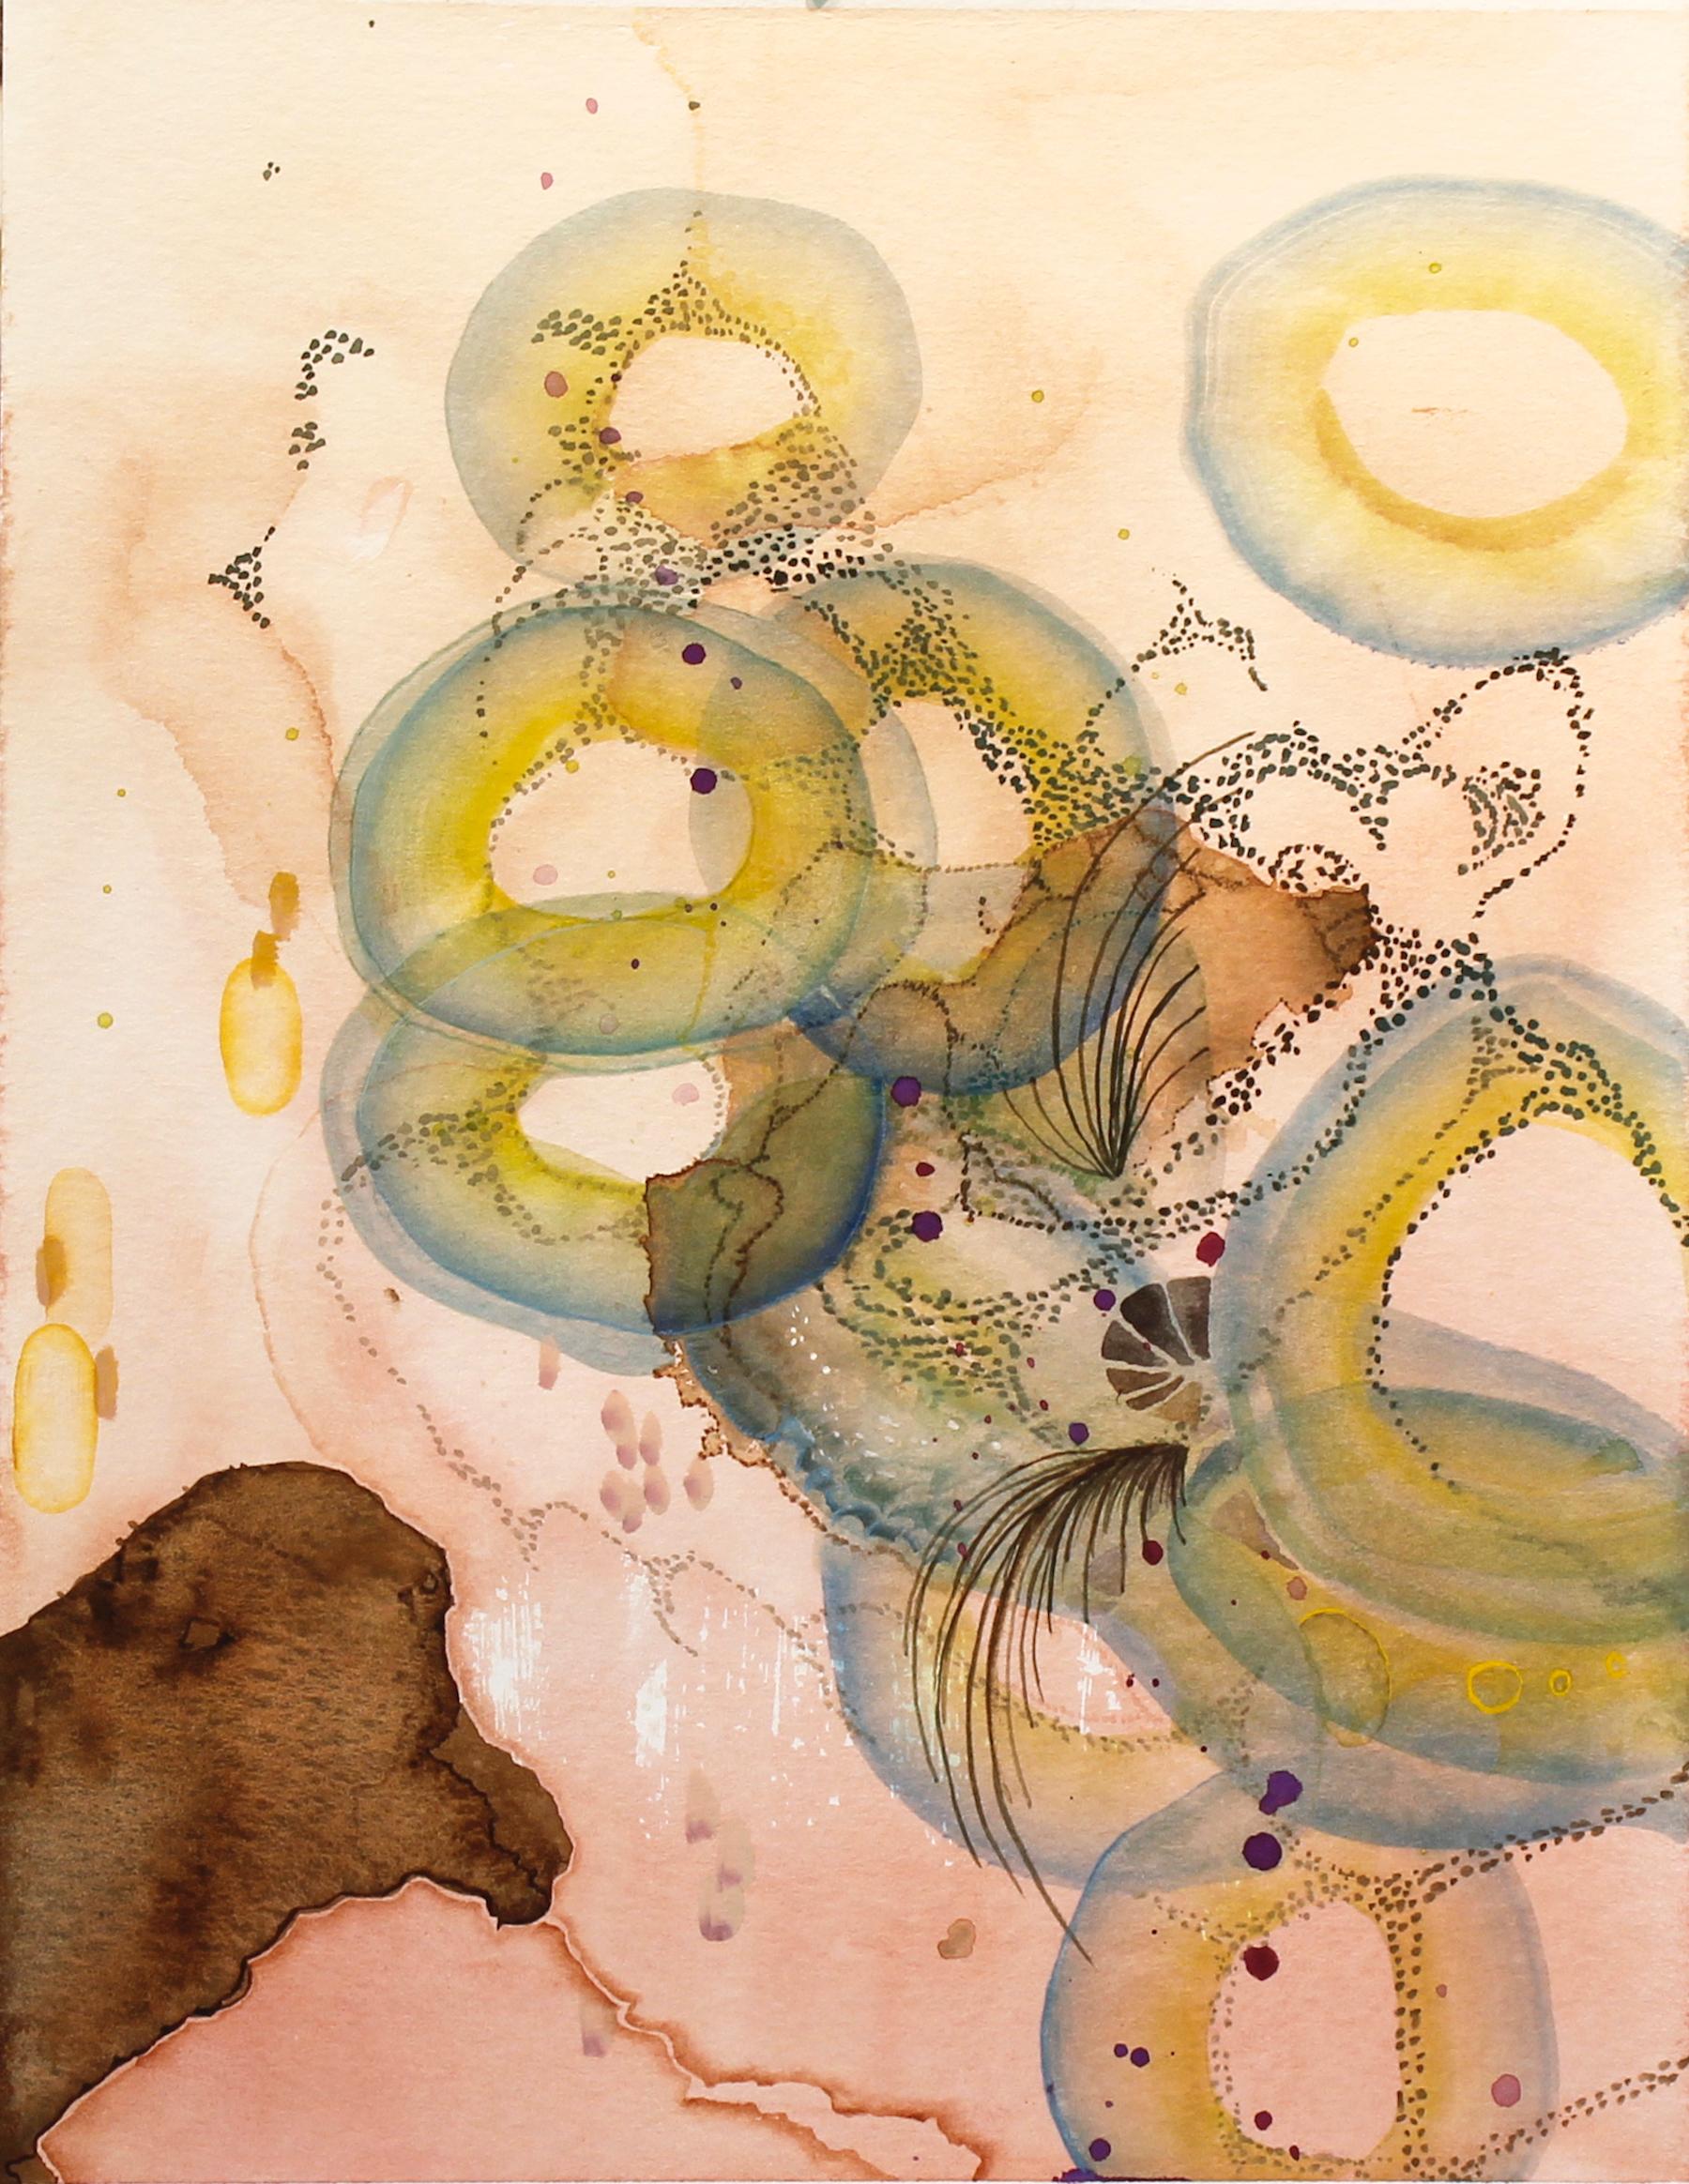 Grayson Chandler Abstract Drawing - "Riverbed, " Watercolor on Paper - Biomorphic Abstraction